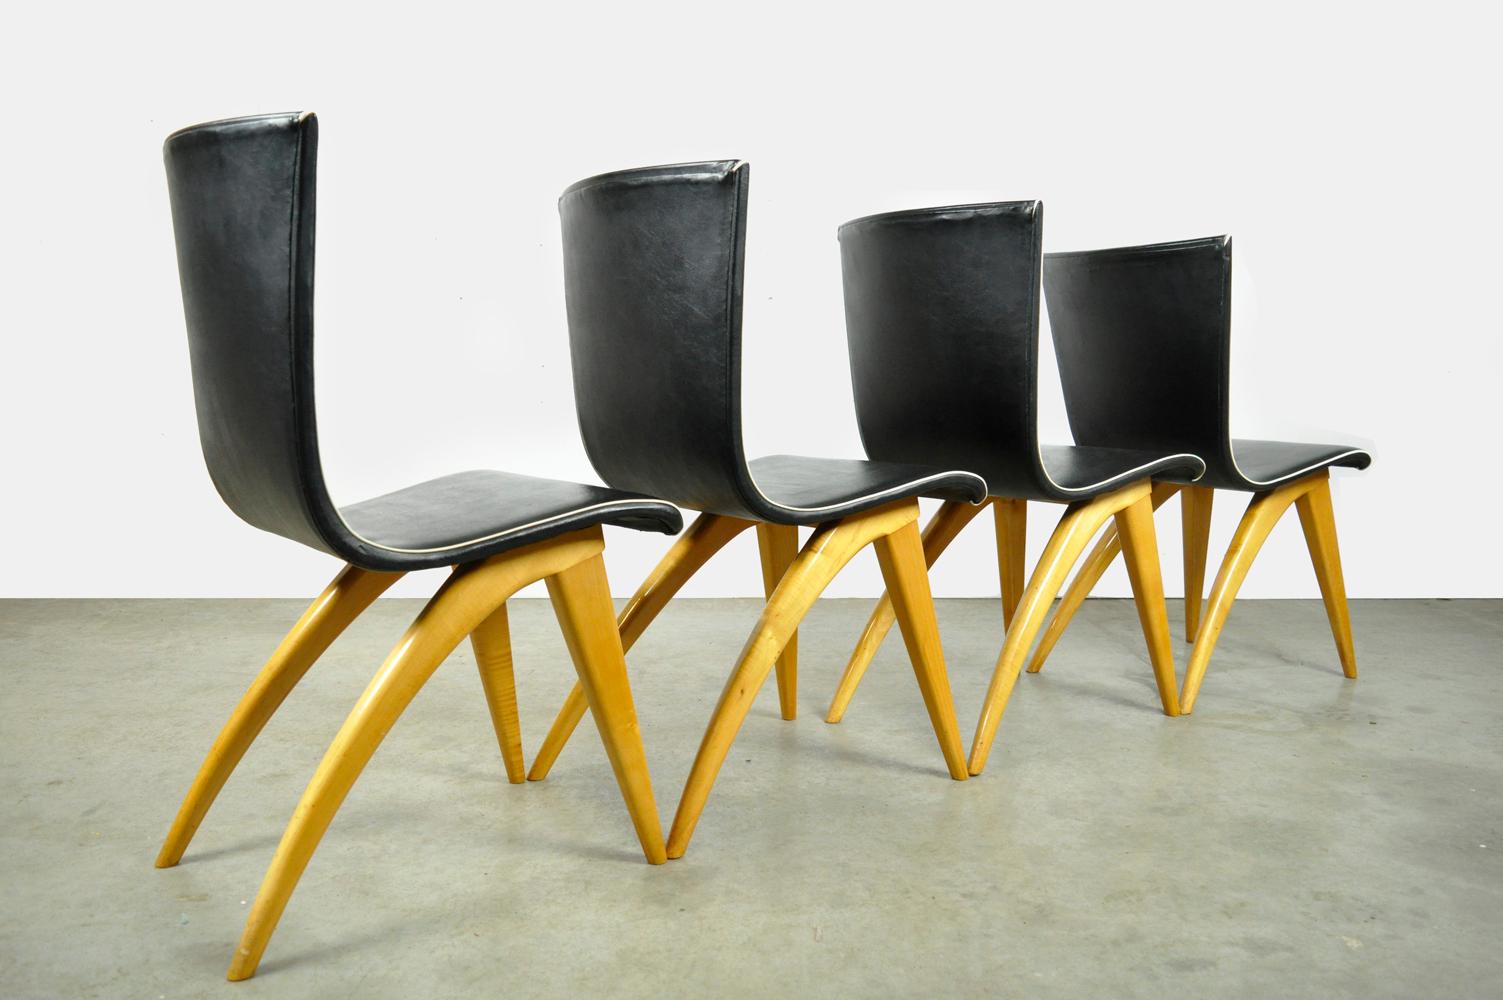 Set wingback dining chairs (4) by G.J. van Os for van Os Culemborg, 1950s In Fair Condition For Sale In Denventer, NL